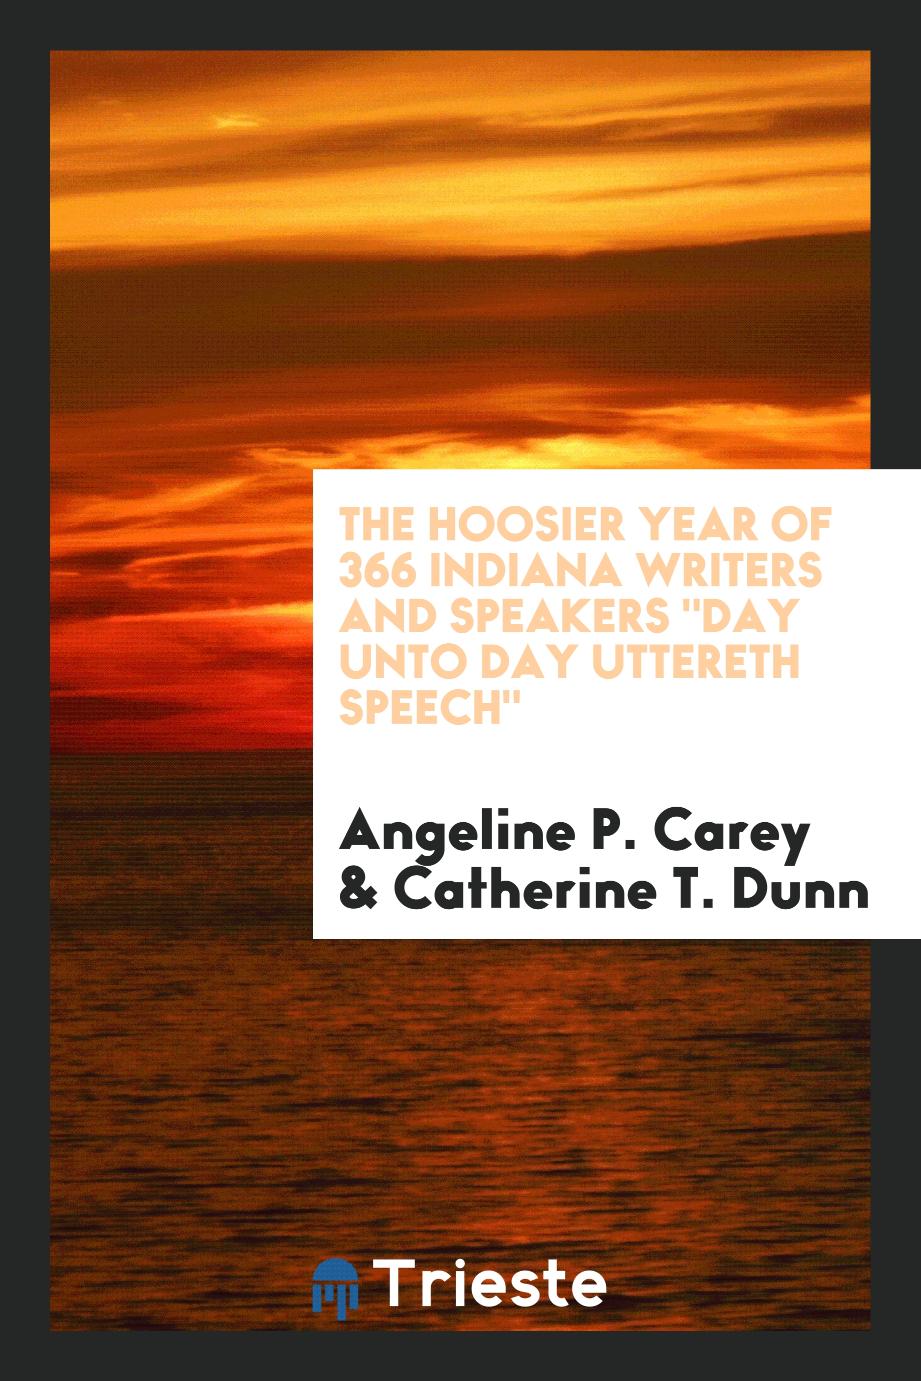 The Hoosier Year of 366 Indiana Writers and Speakers "Day unto Day Uttereth Speech"